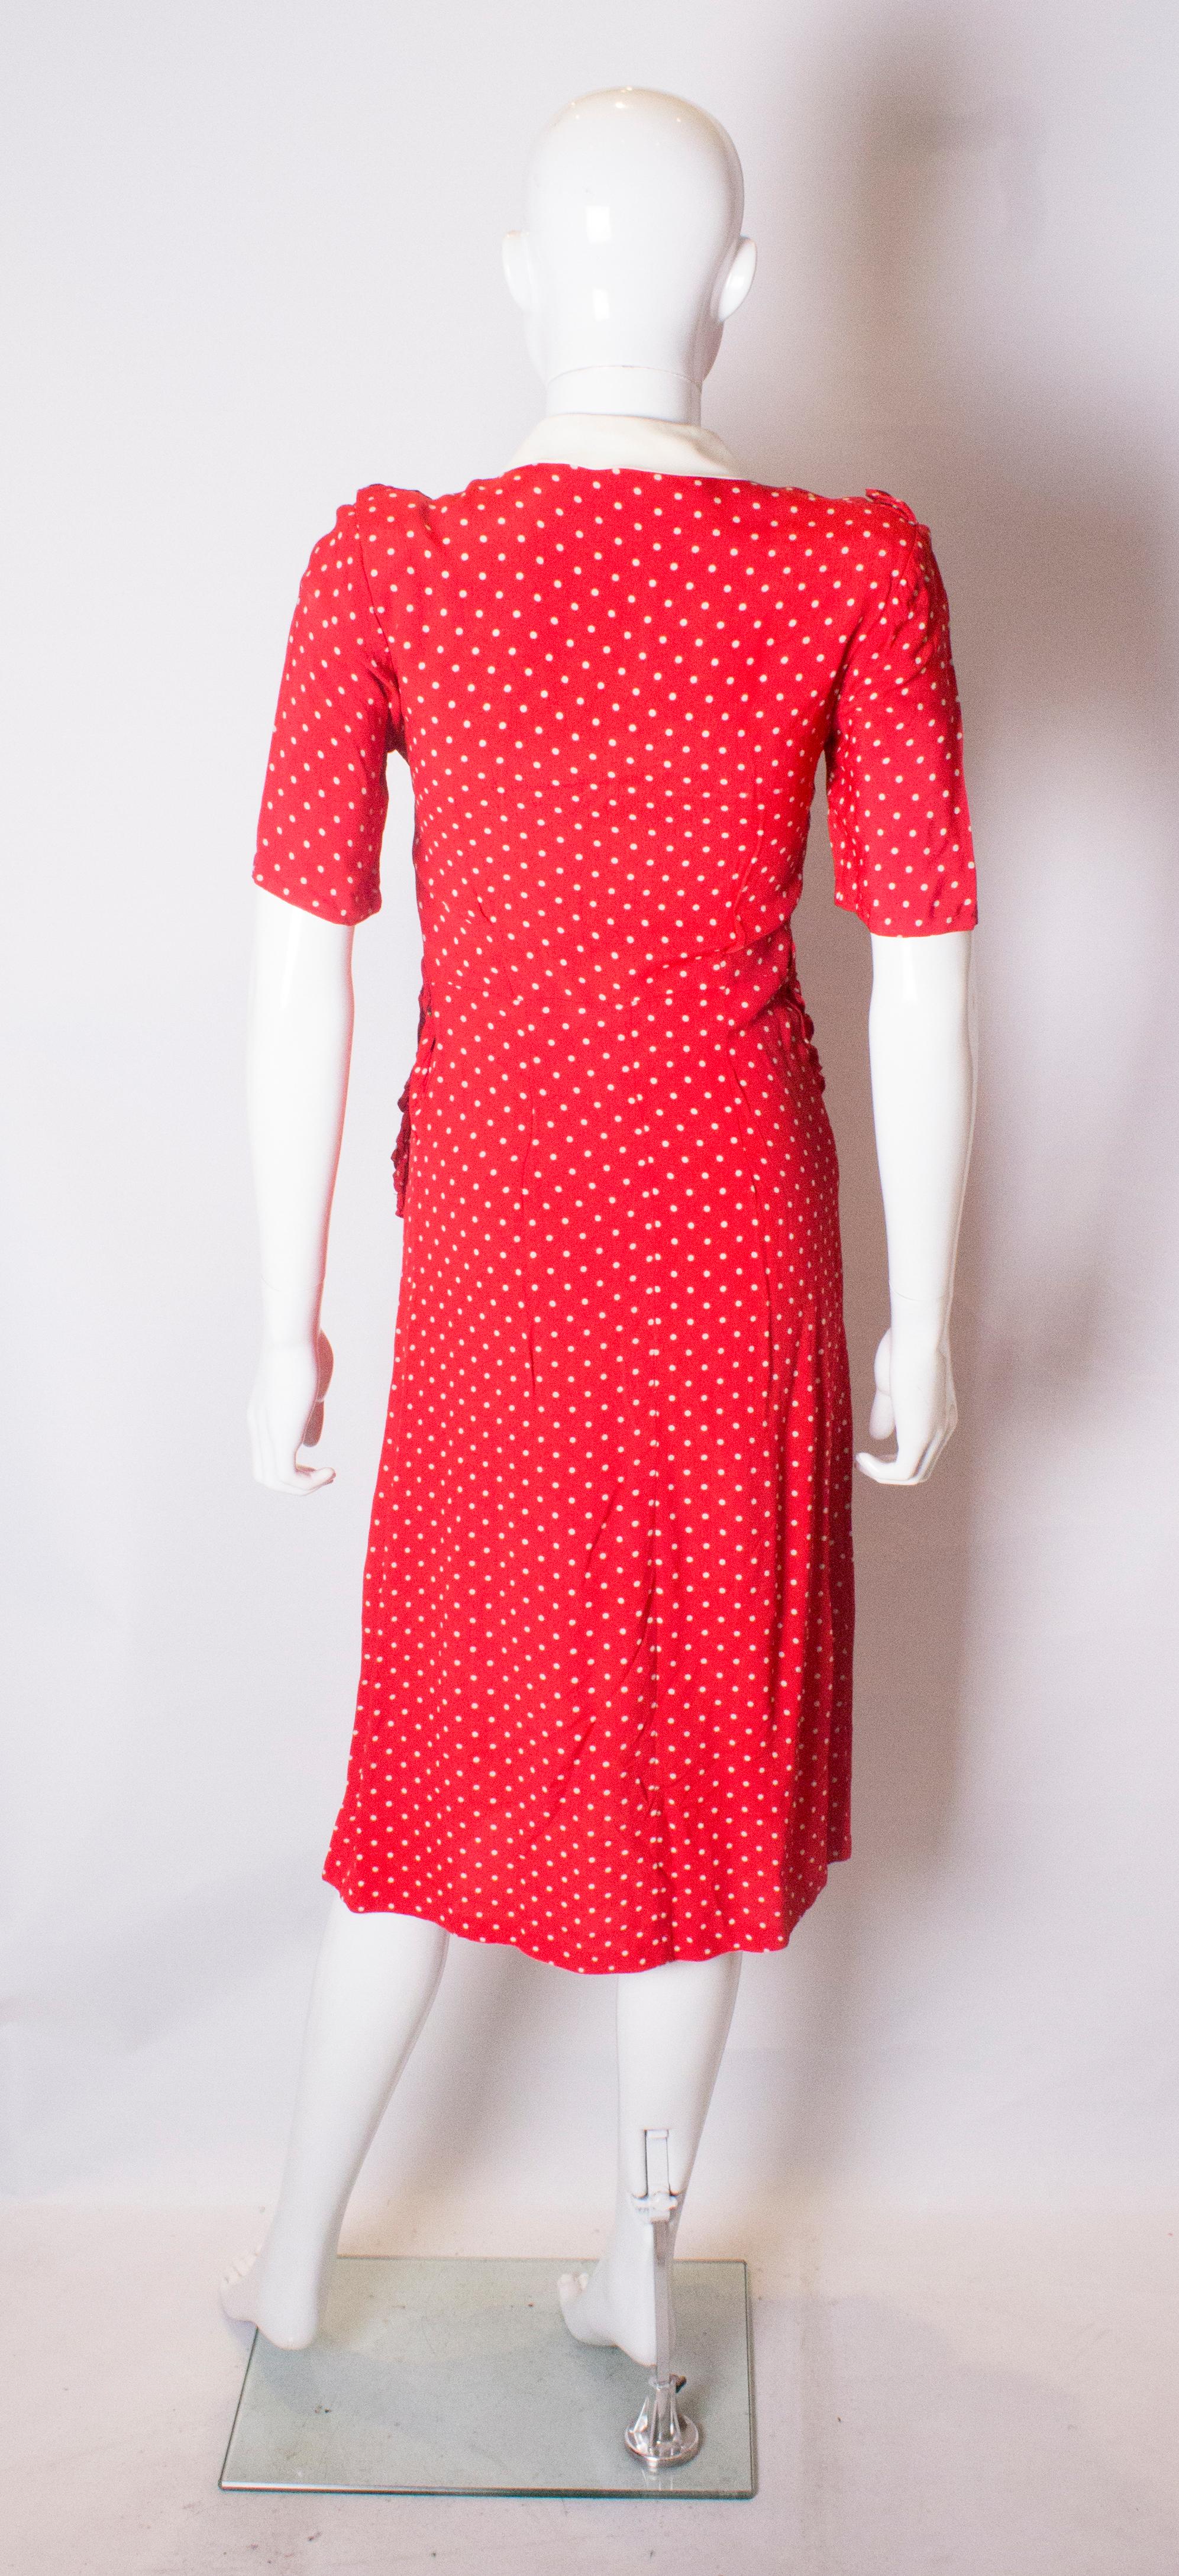 Women's Vintage 1940s Red Polka Dot Dress with Frill Trim